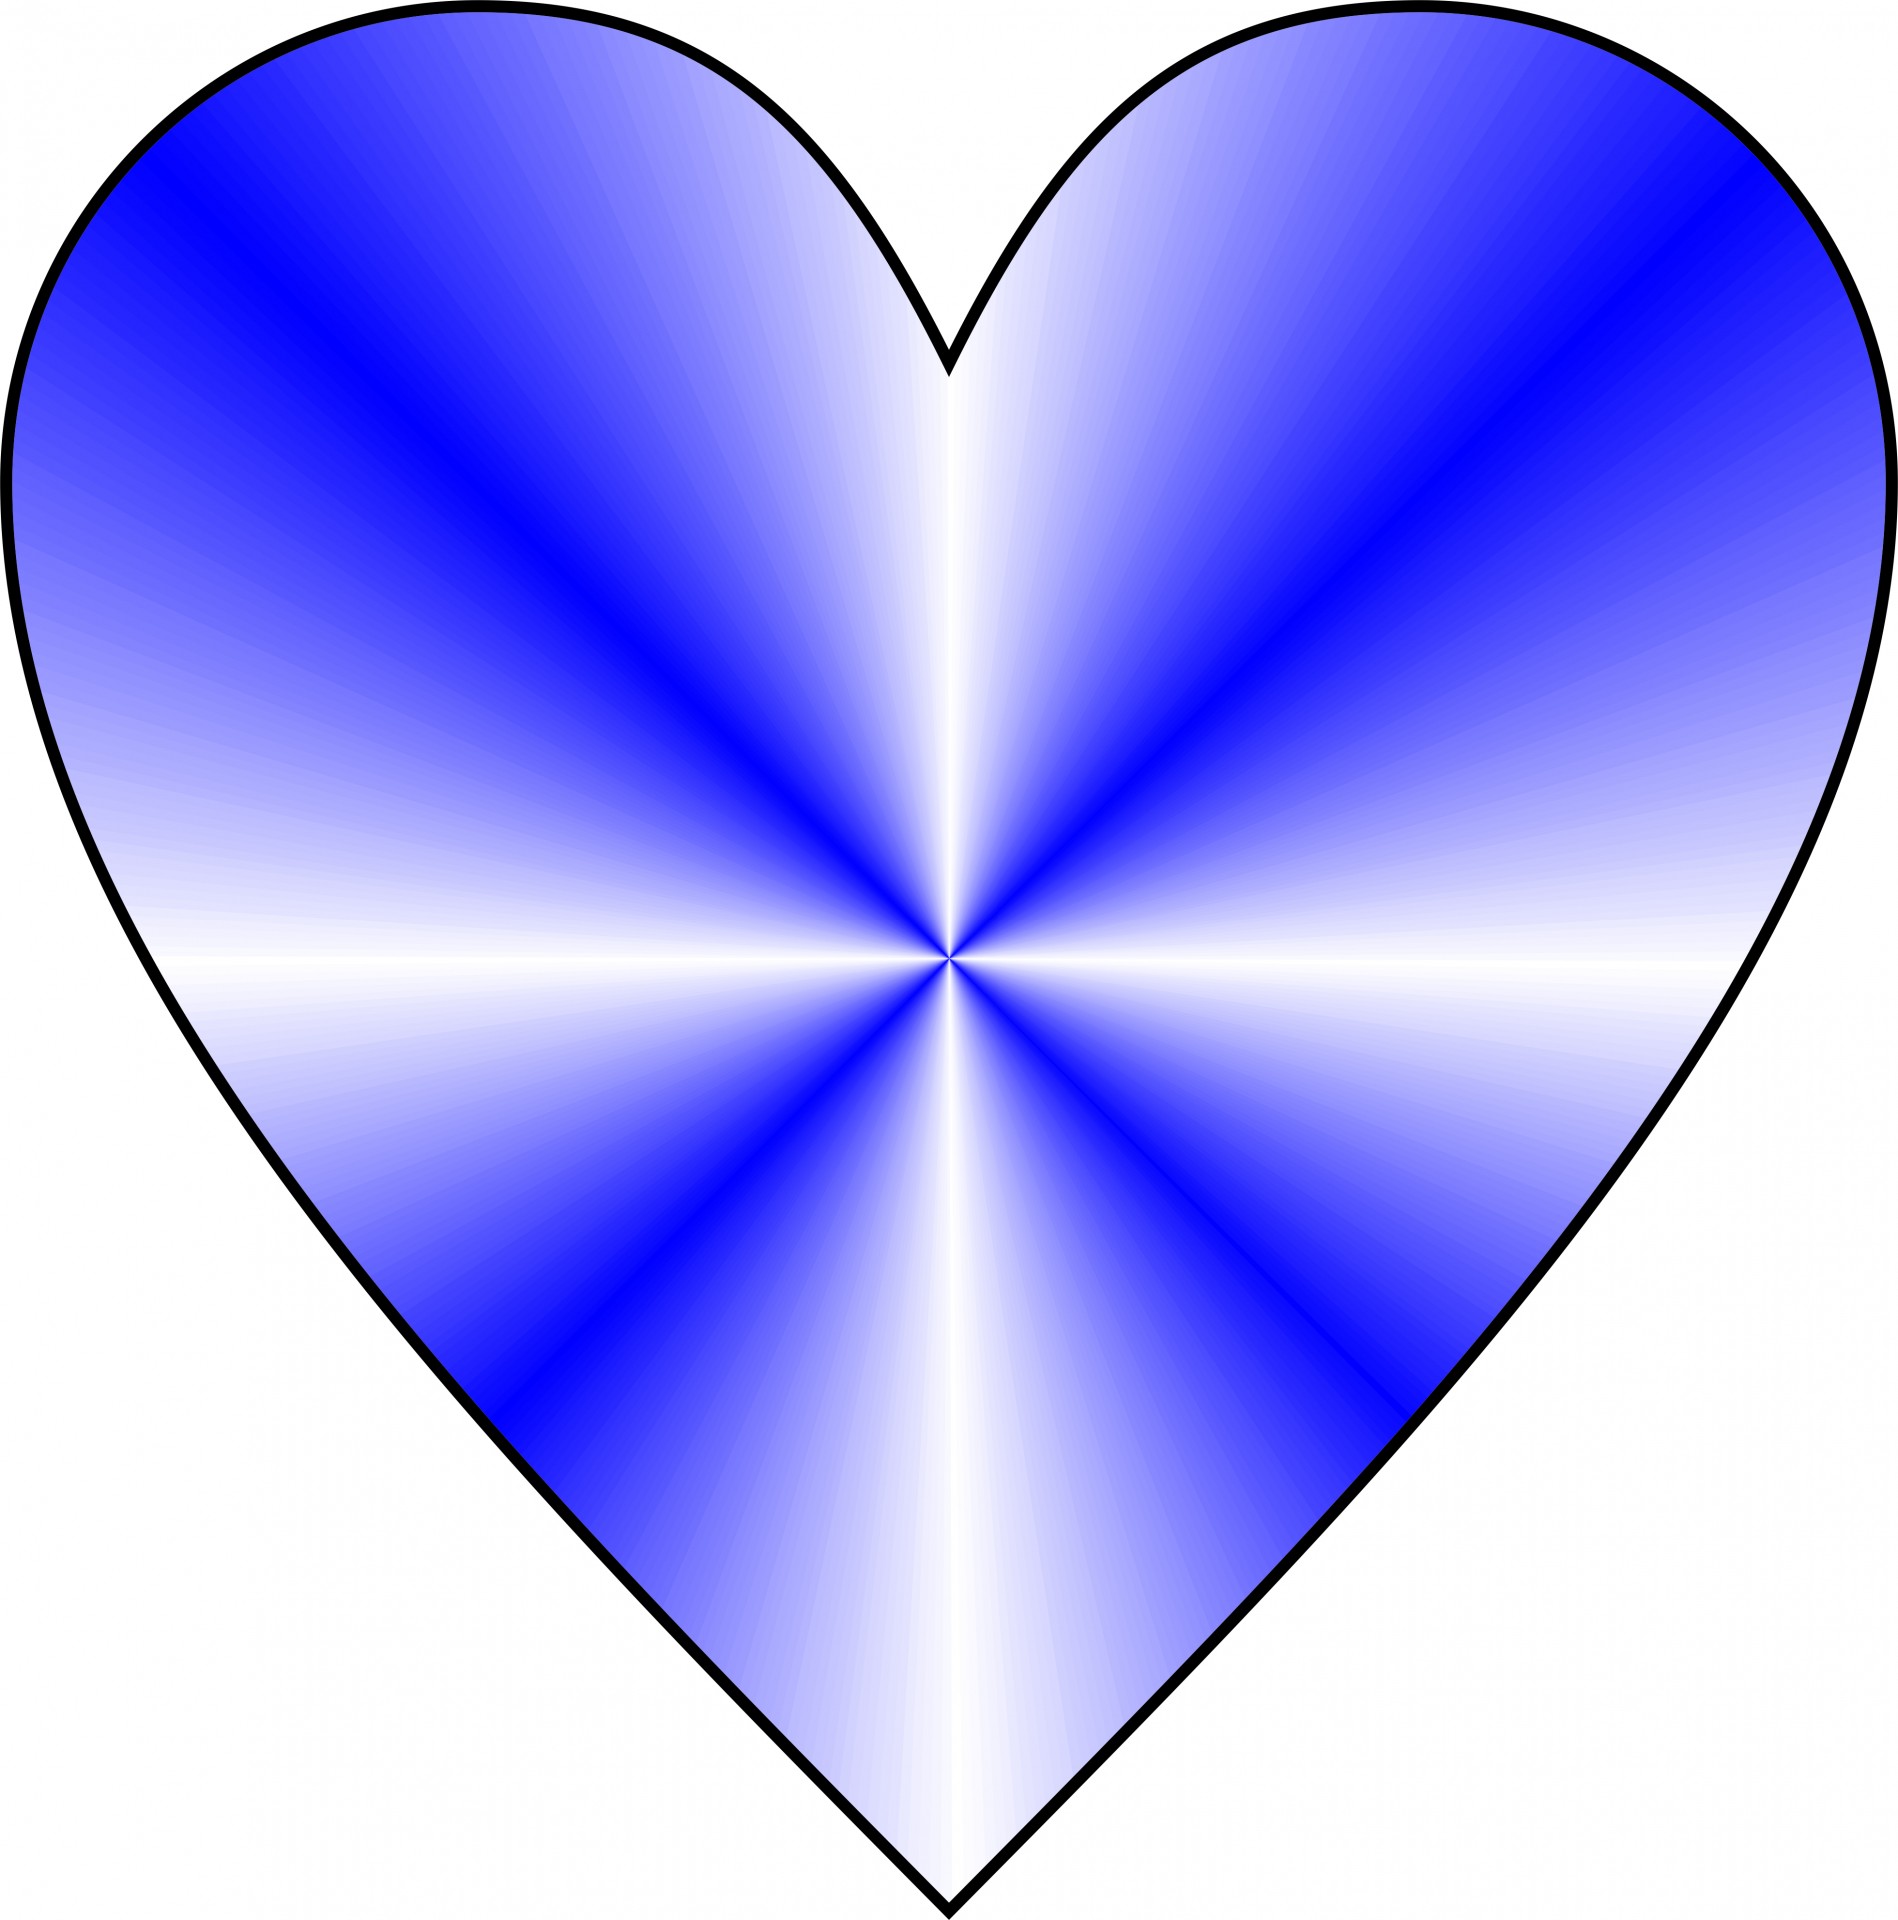 conical blue heart free photo